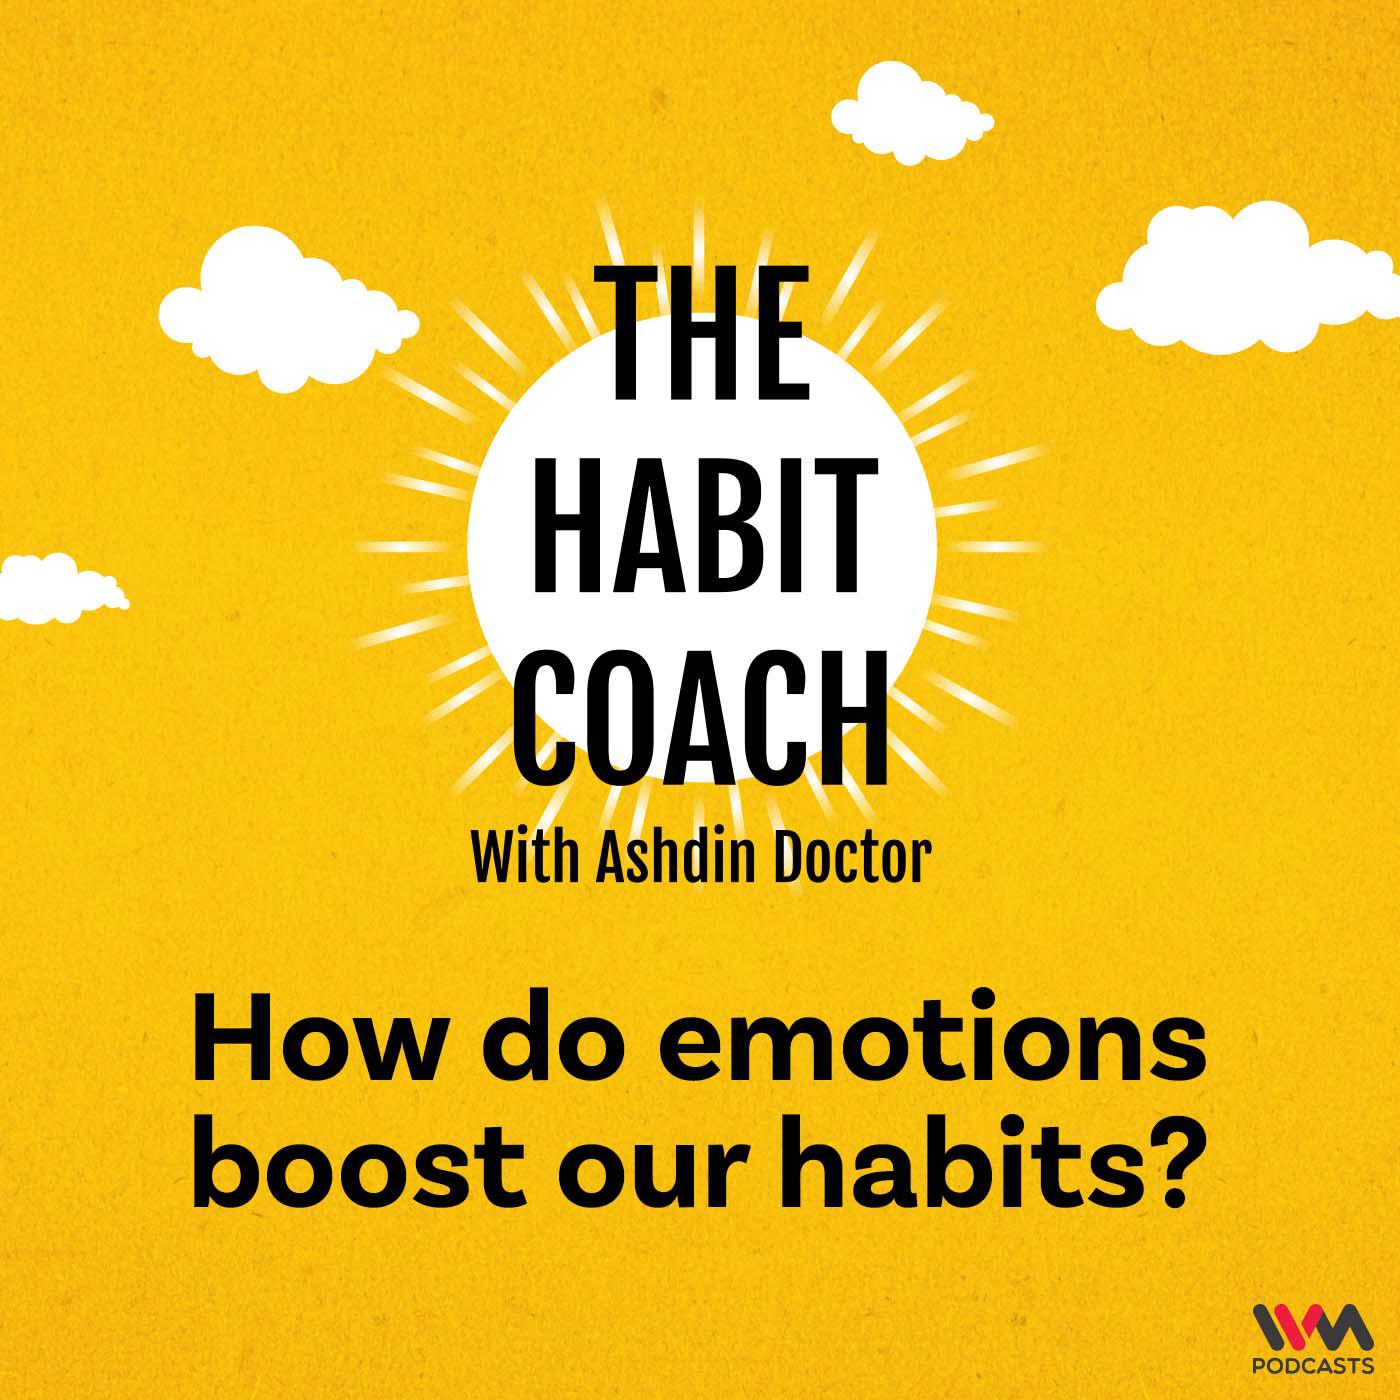 How do emotions boost our habits?